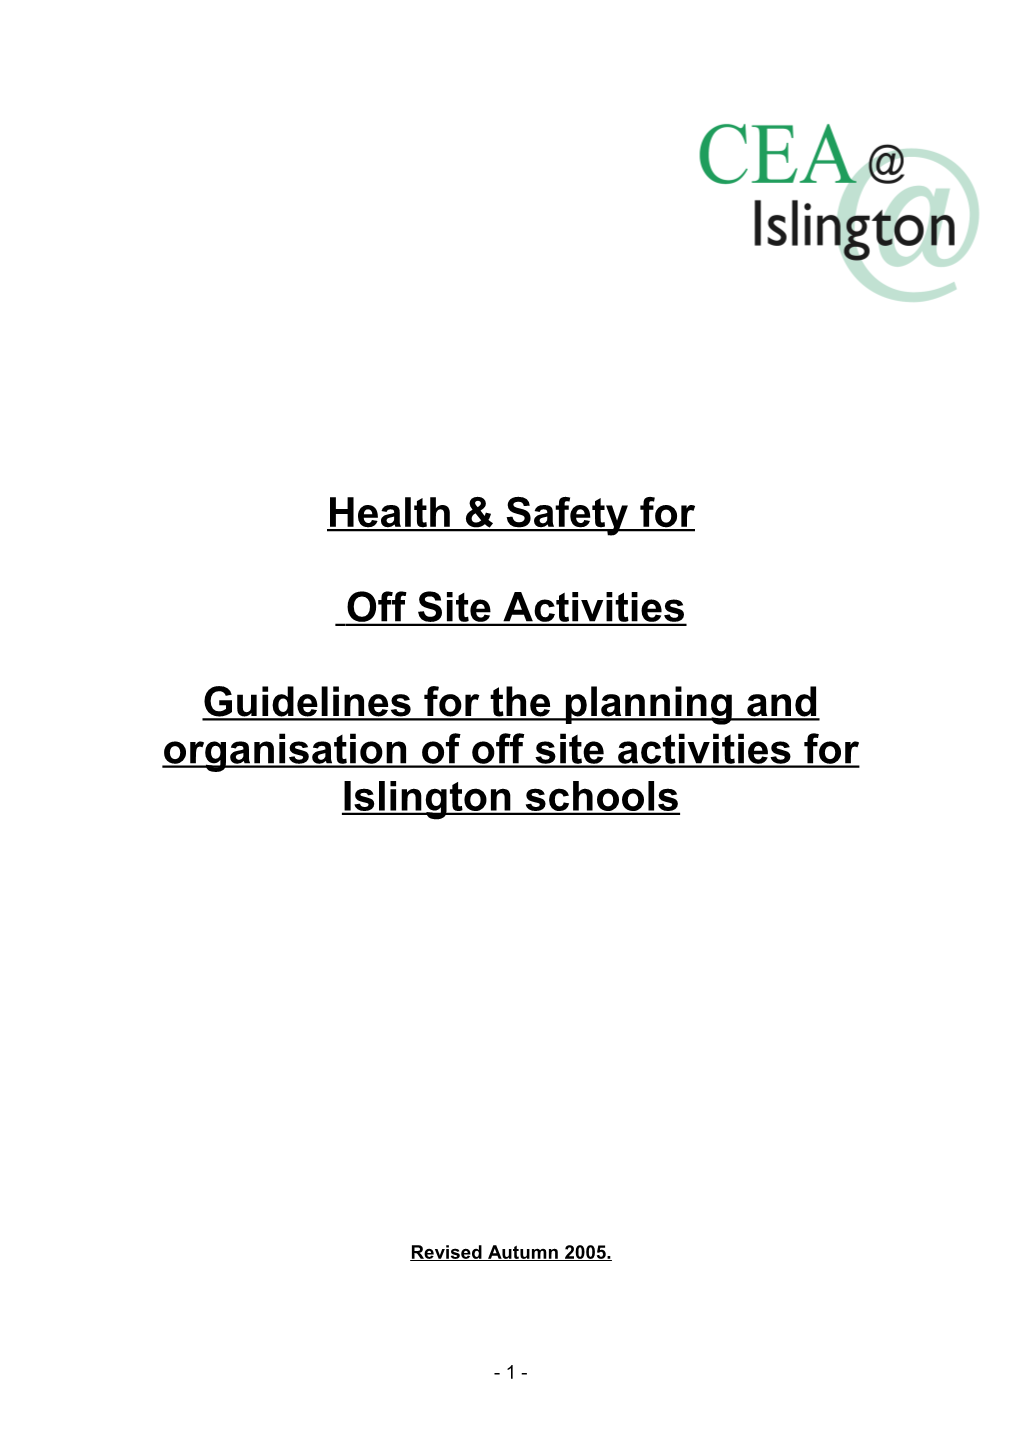 Guidance Procedures for the Planning and Organisation of Off-Site Visits By